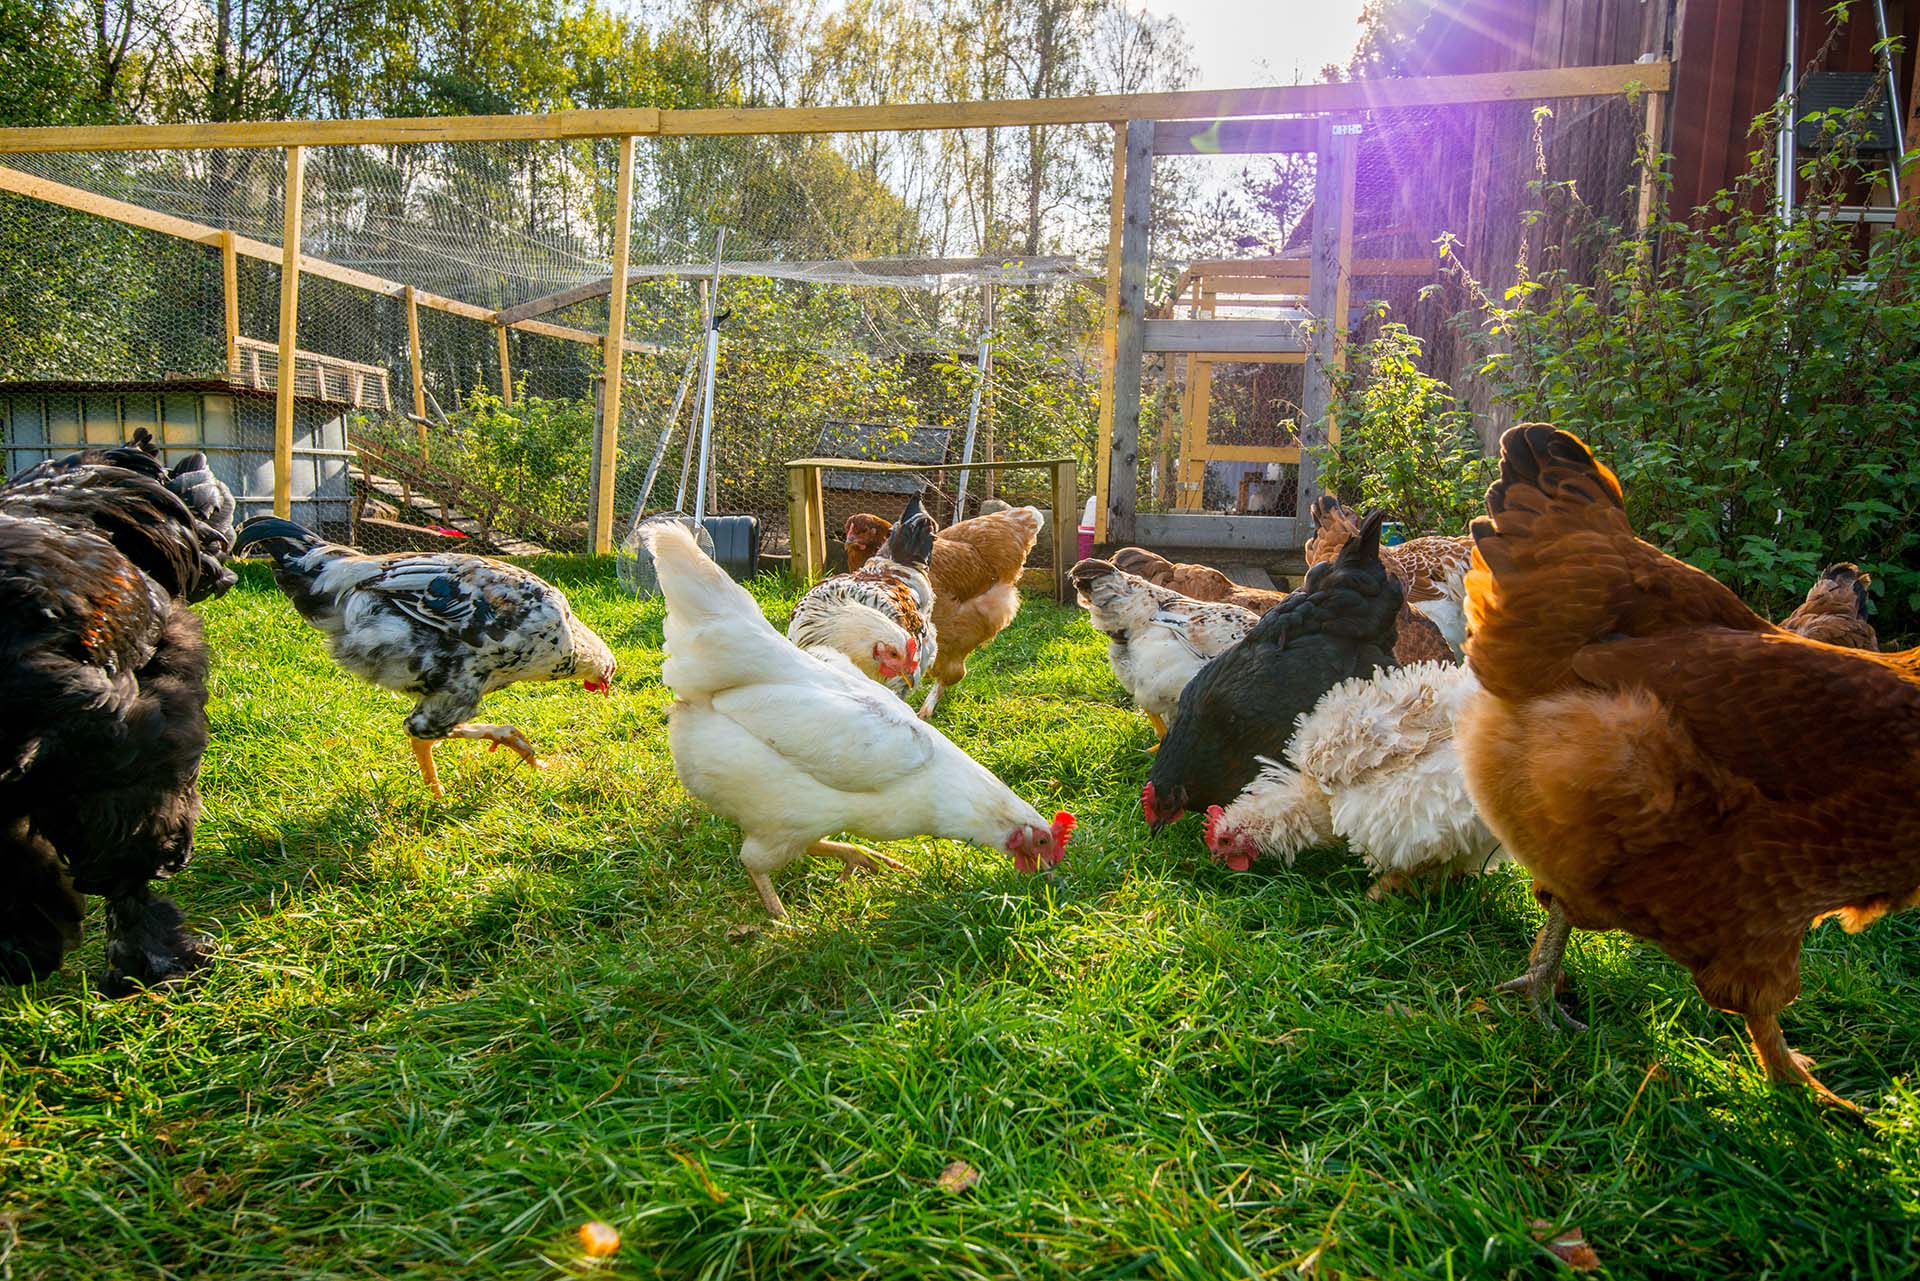 Do Chickens Attract Rats? Picture shows chickens in a garden coop